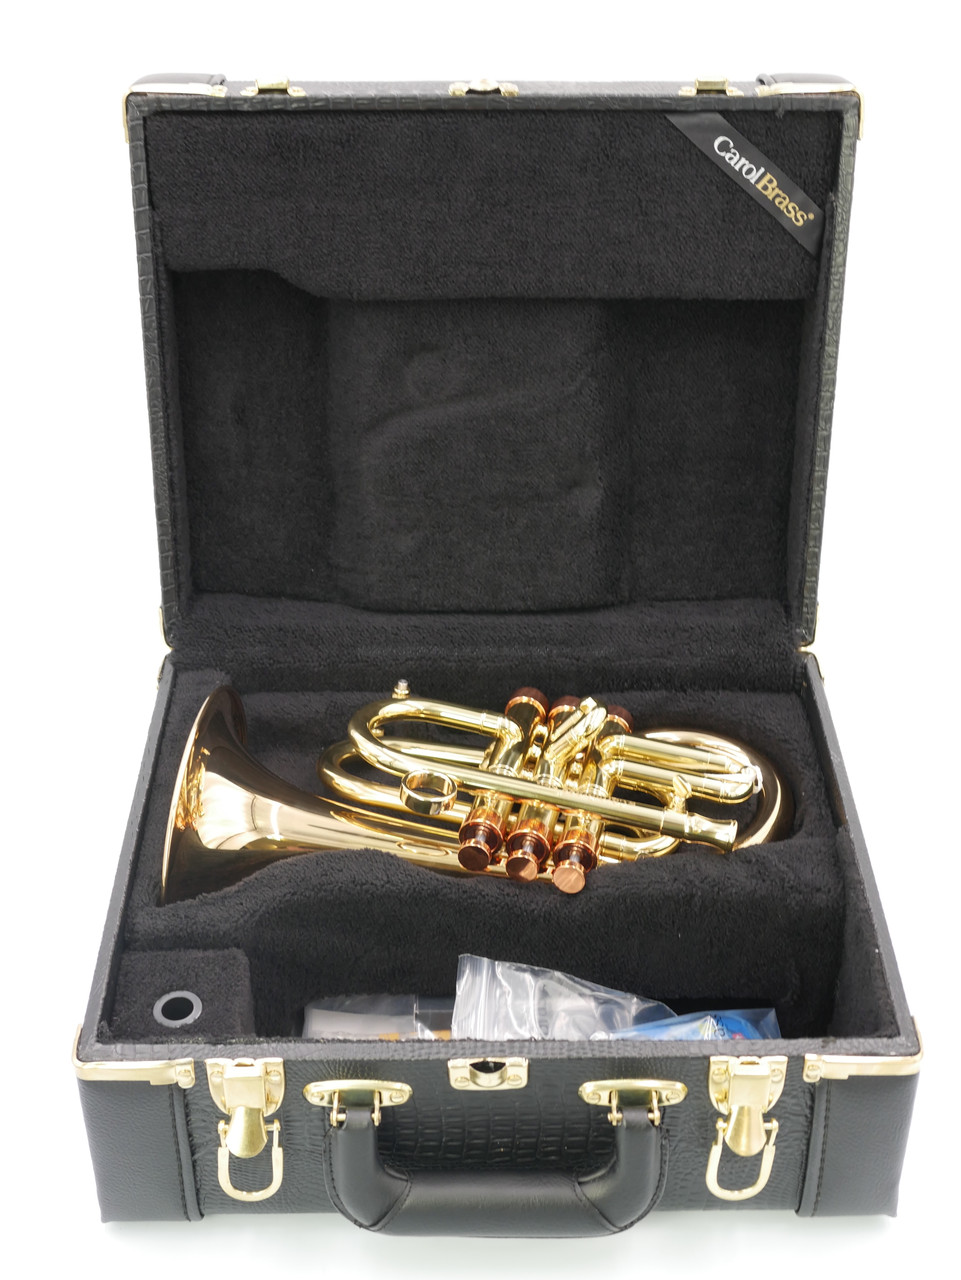 Taylor by Carolbrass Phat Puppy Pocket Flugelhorn in Clear Lacquer!